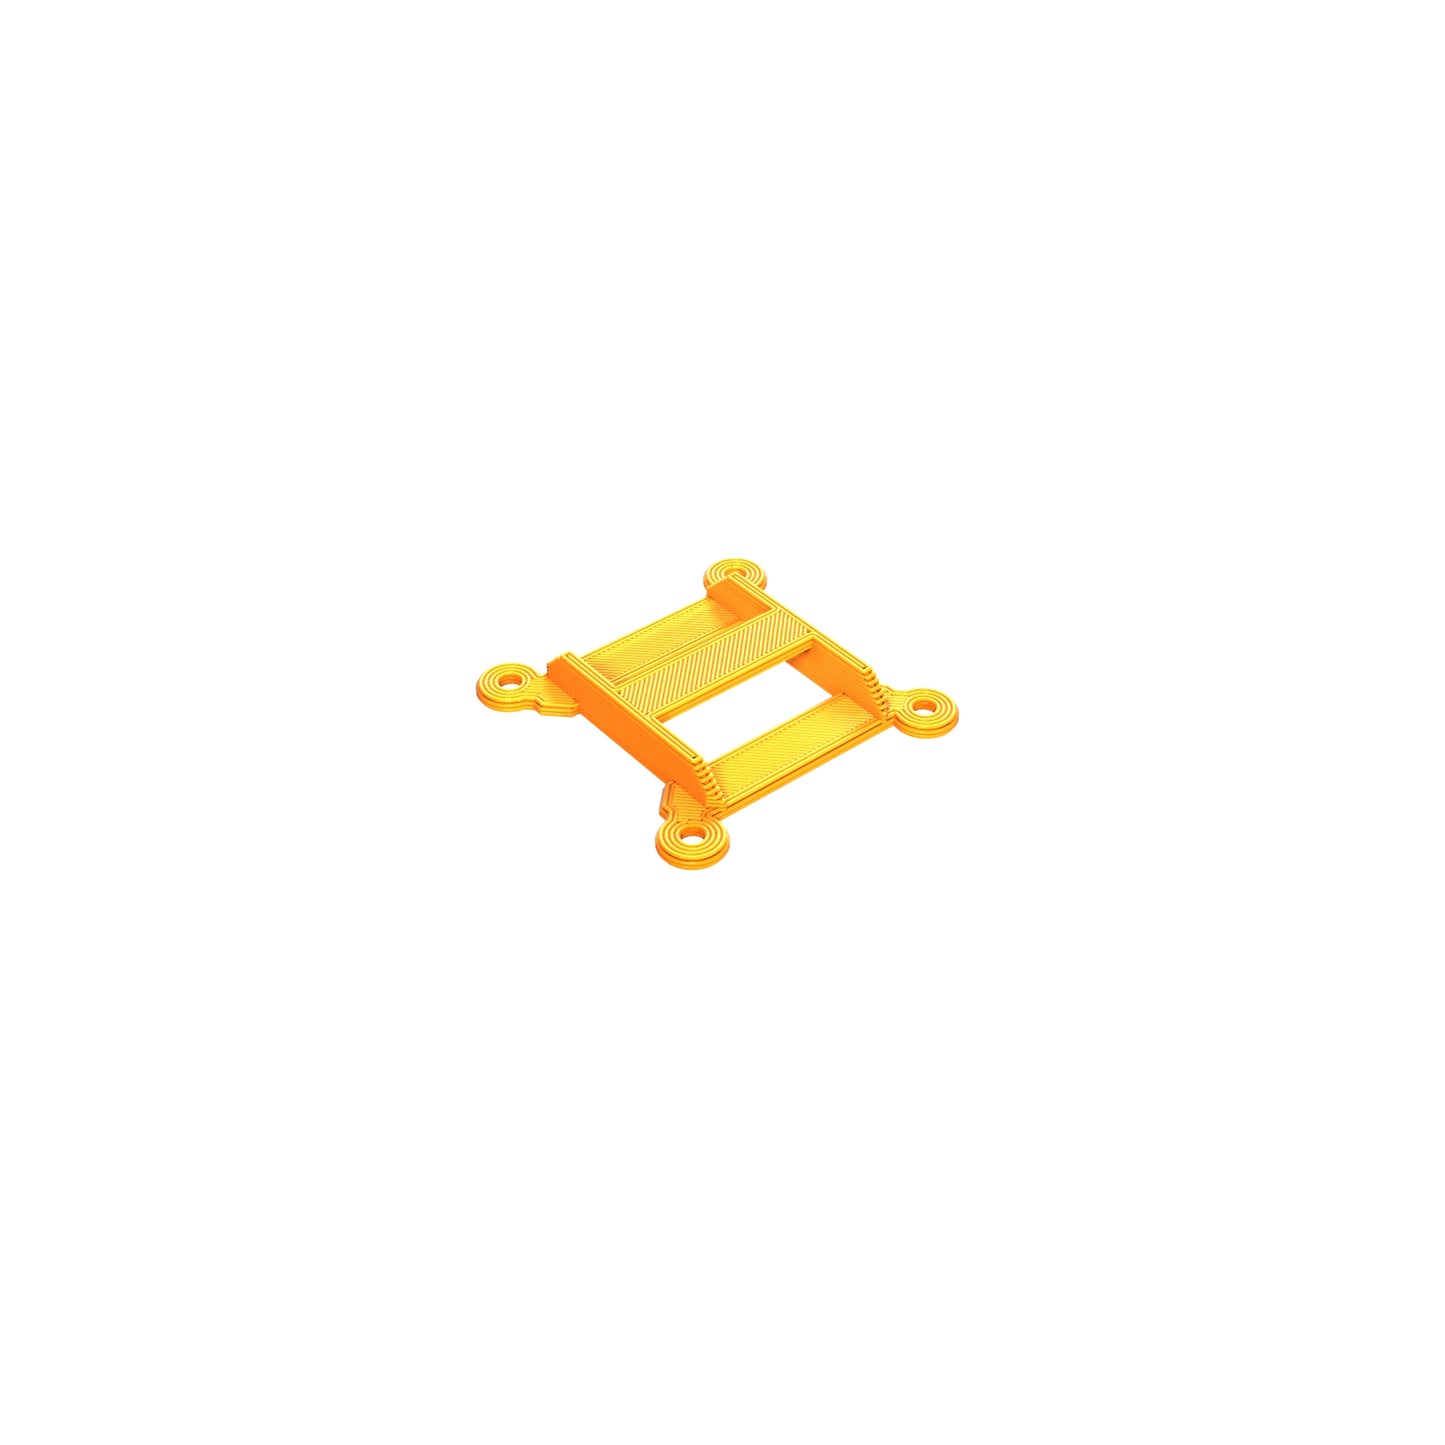 Universal FPV Receiver Stack Mount